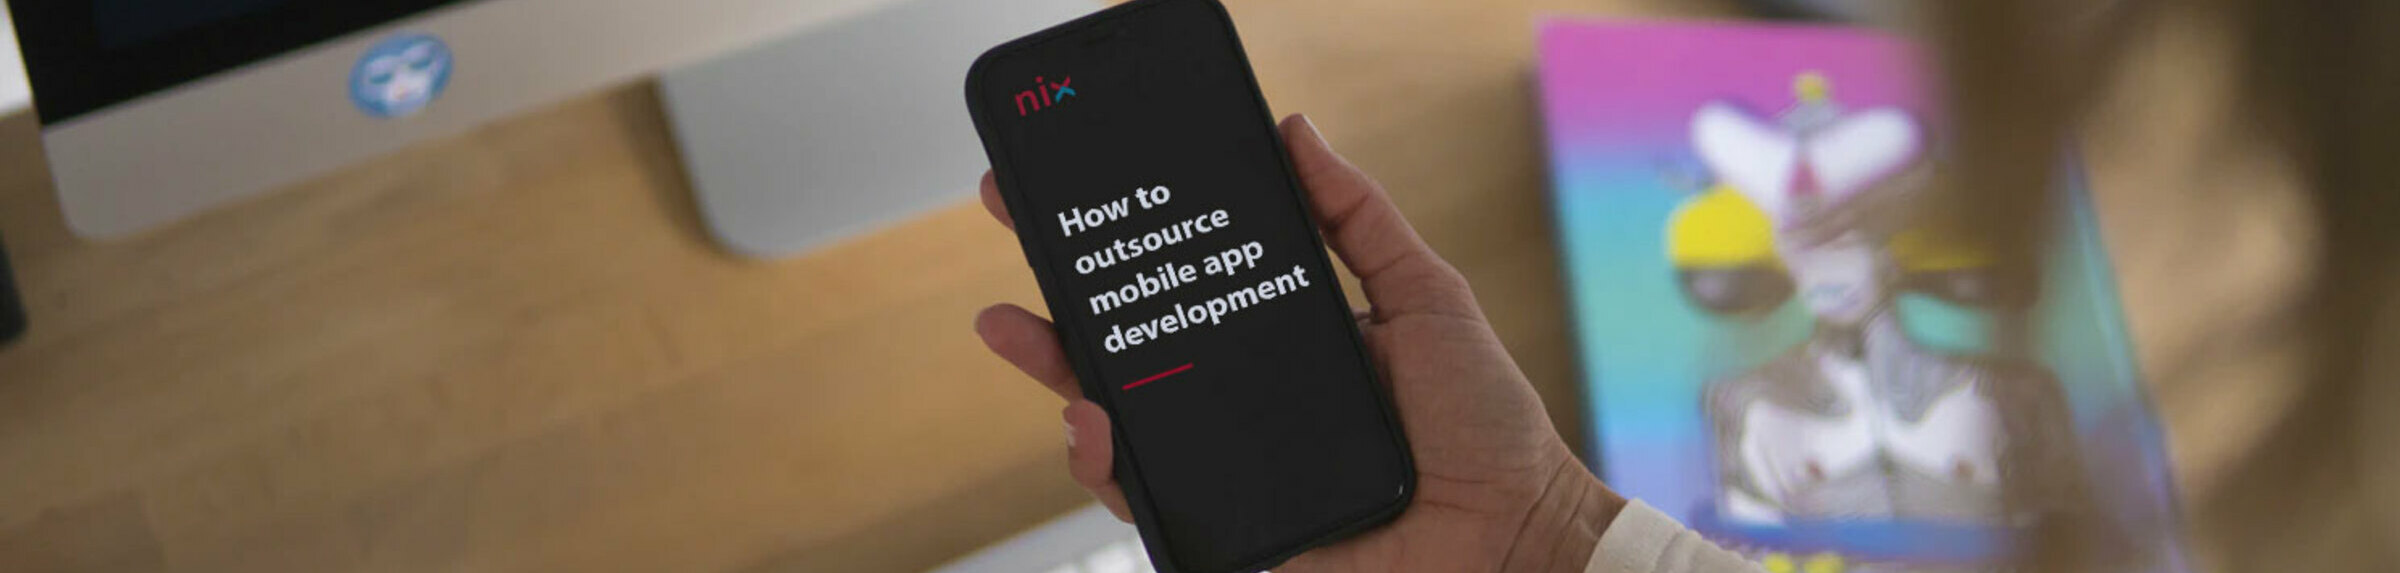 How To Outsource Mobile App Development In 2020